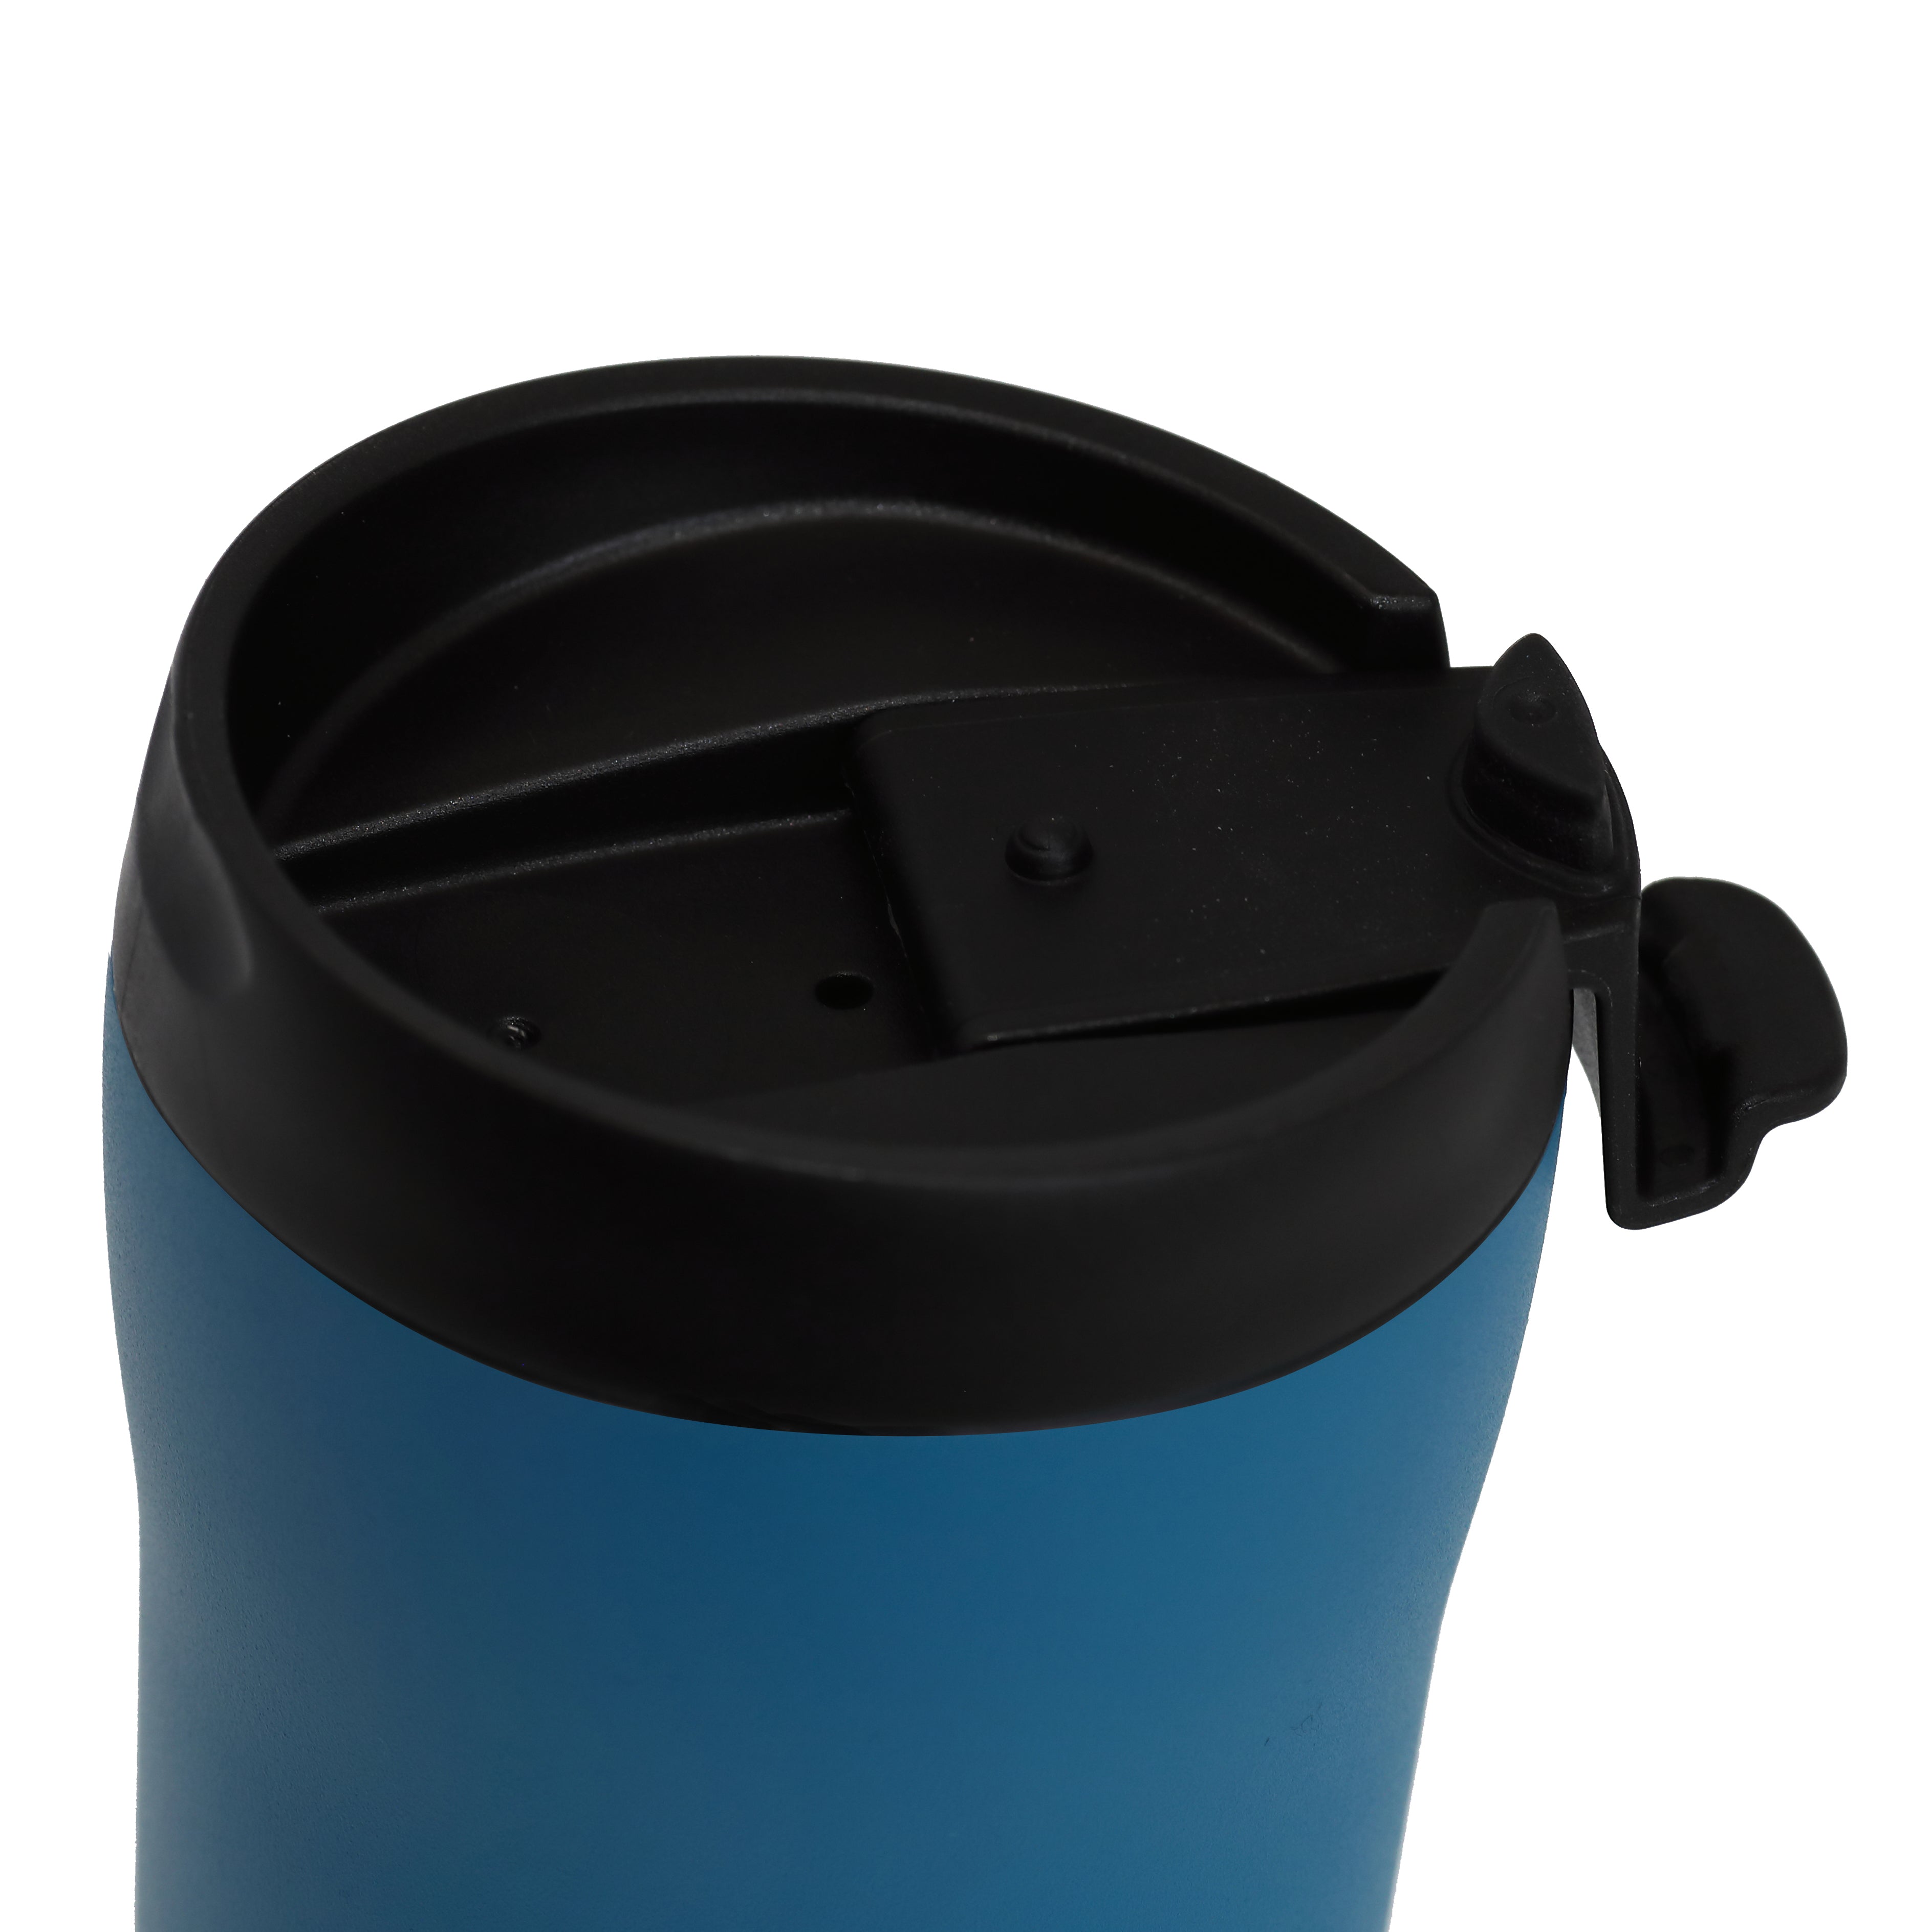 IN STOCK, Small Silicone Lid, Replacement Small Travel 16 Oz. Mug